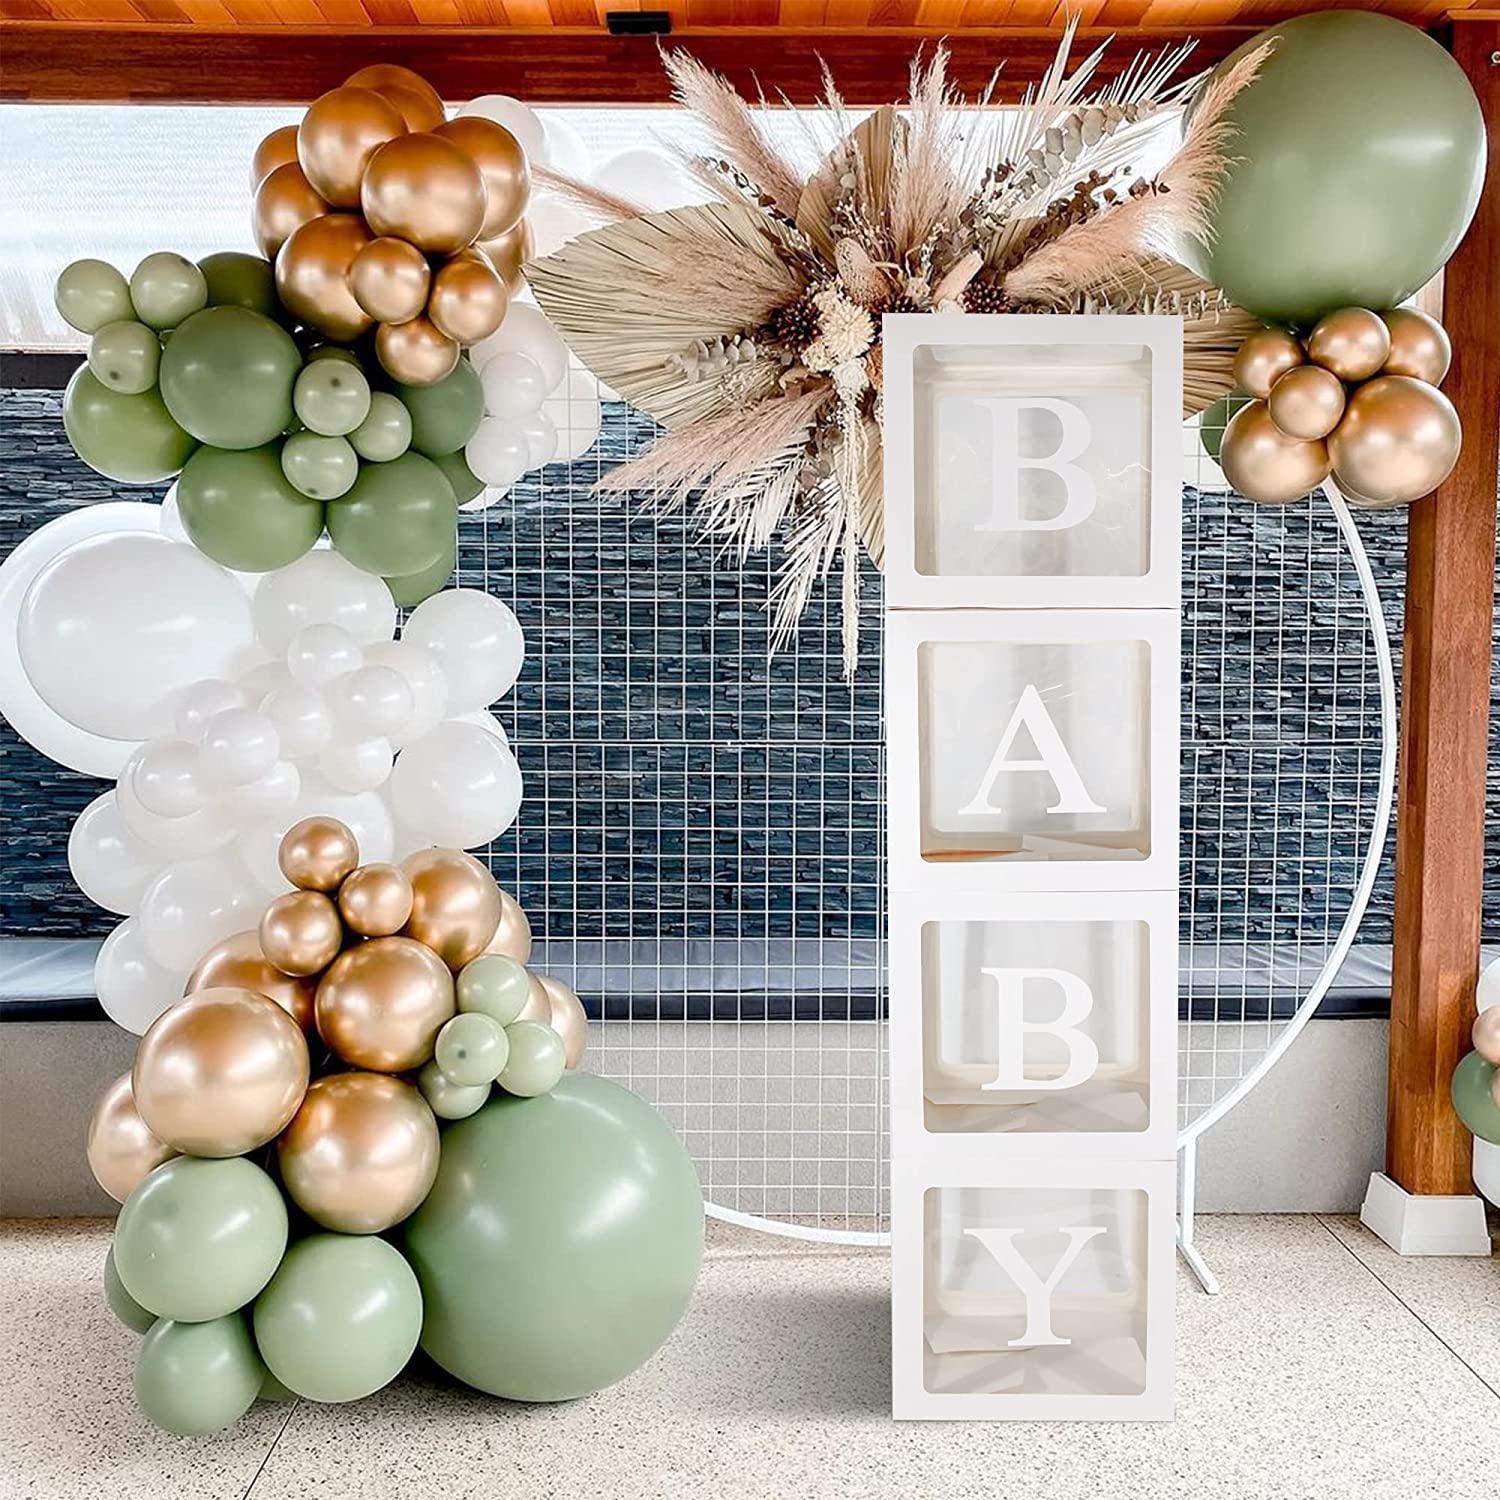 Premium Baby Shower Decorations For Boy or Girl Kit - Jumbo 4 pcs  Transparent Balloon Boxes Decor with Letters, Balloon Blocks Includes BABY  Letters, Gender Reveal Decor, 1st Birthday Party Backdrop White